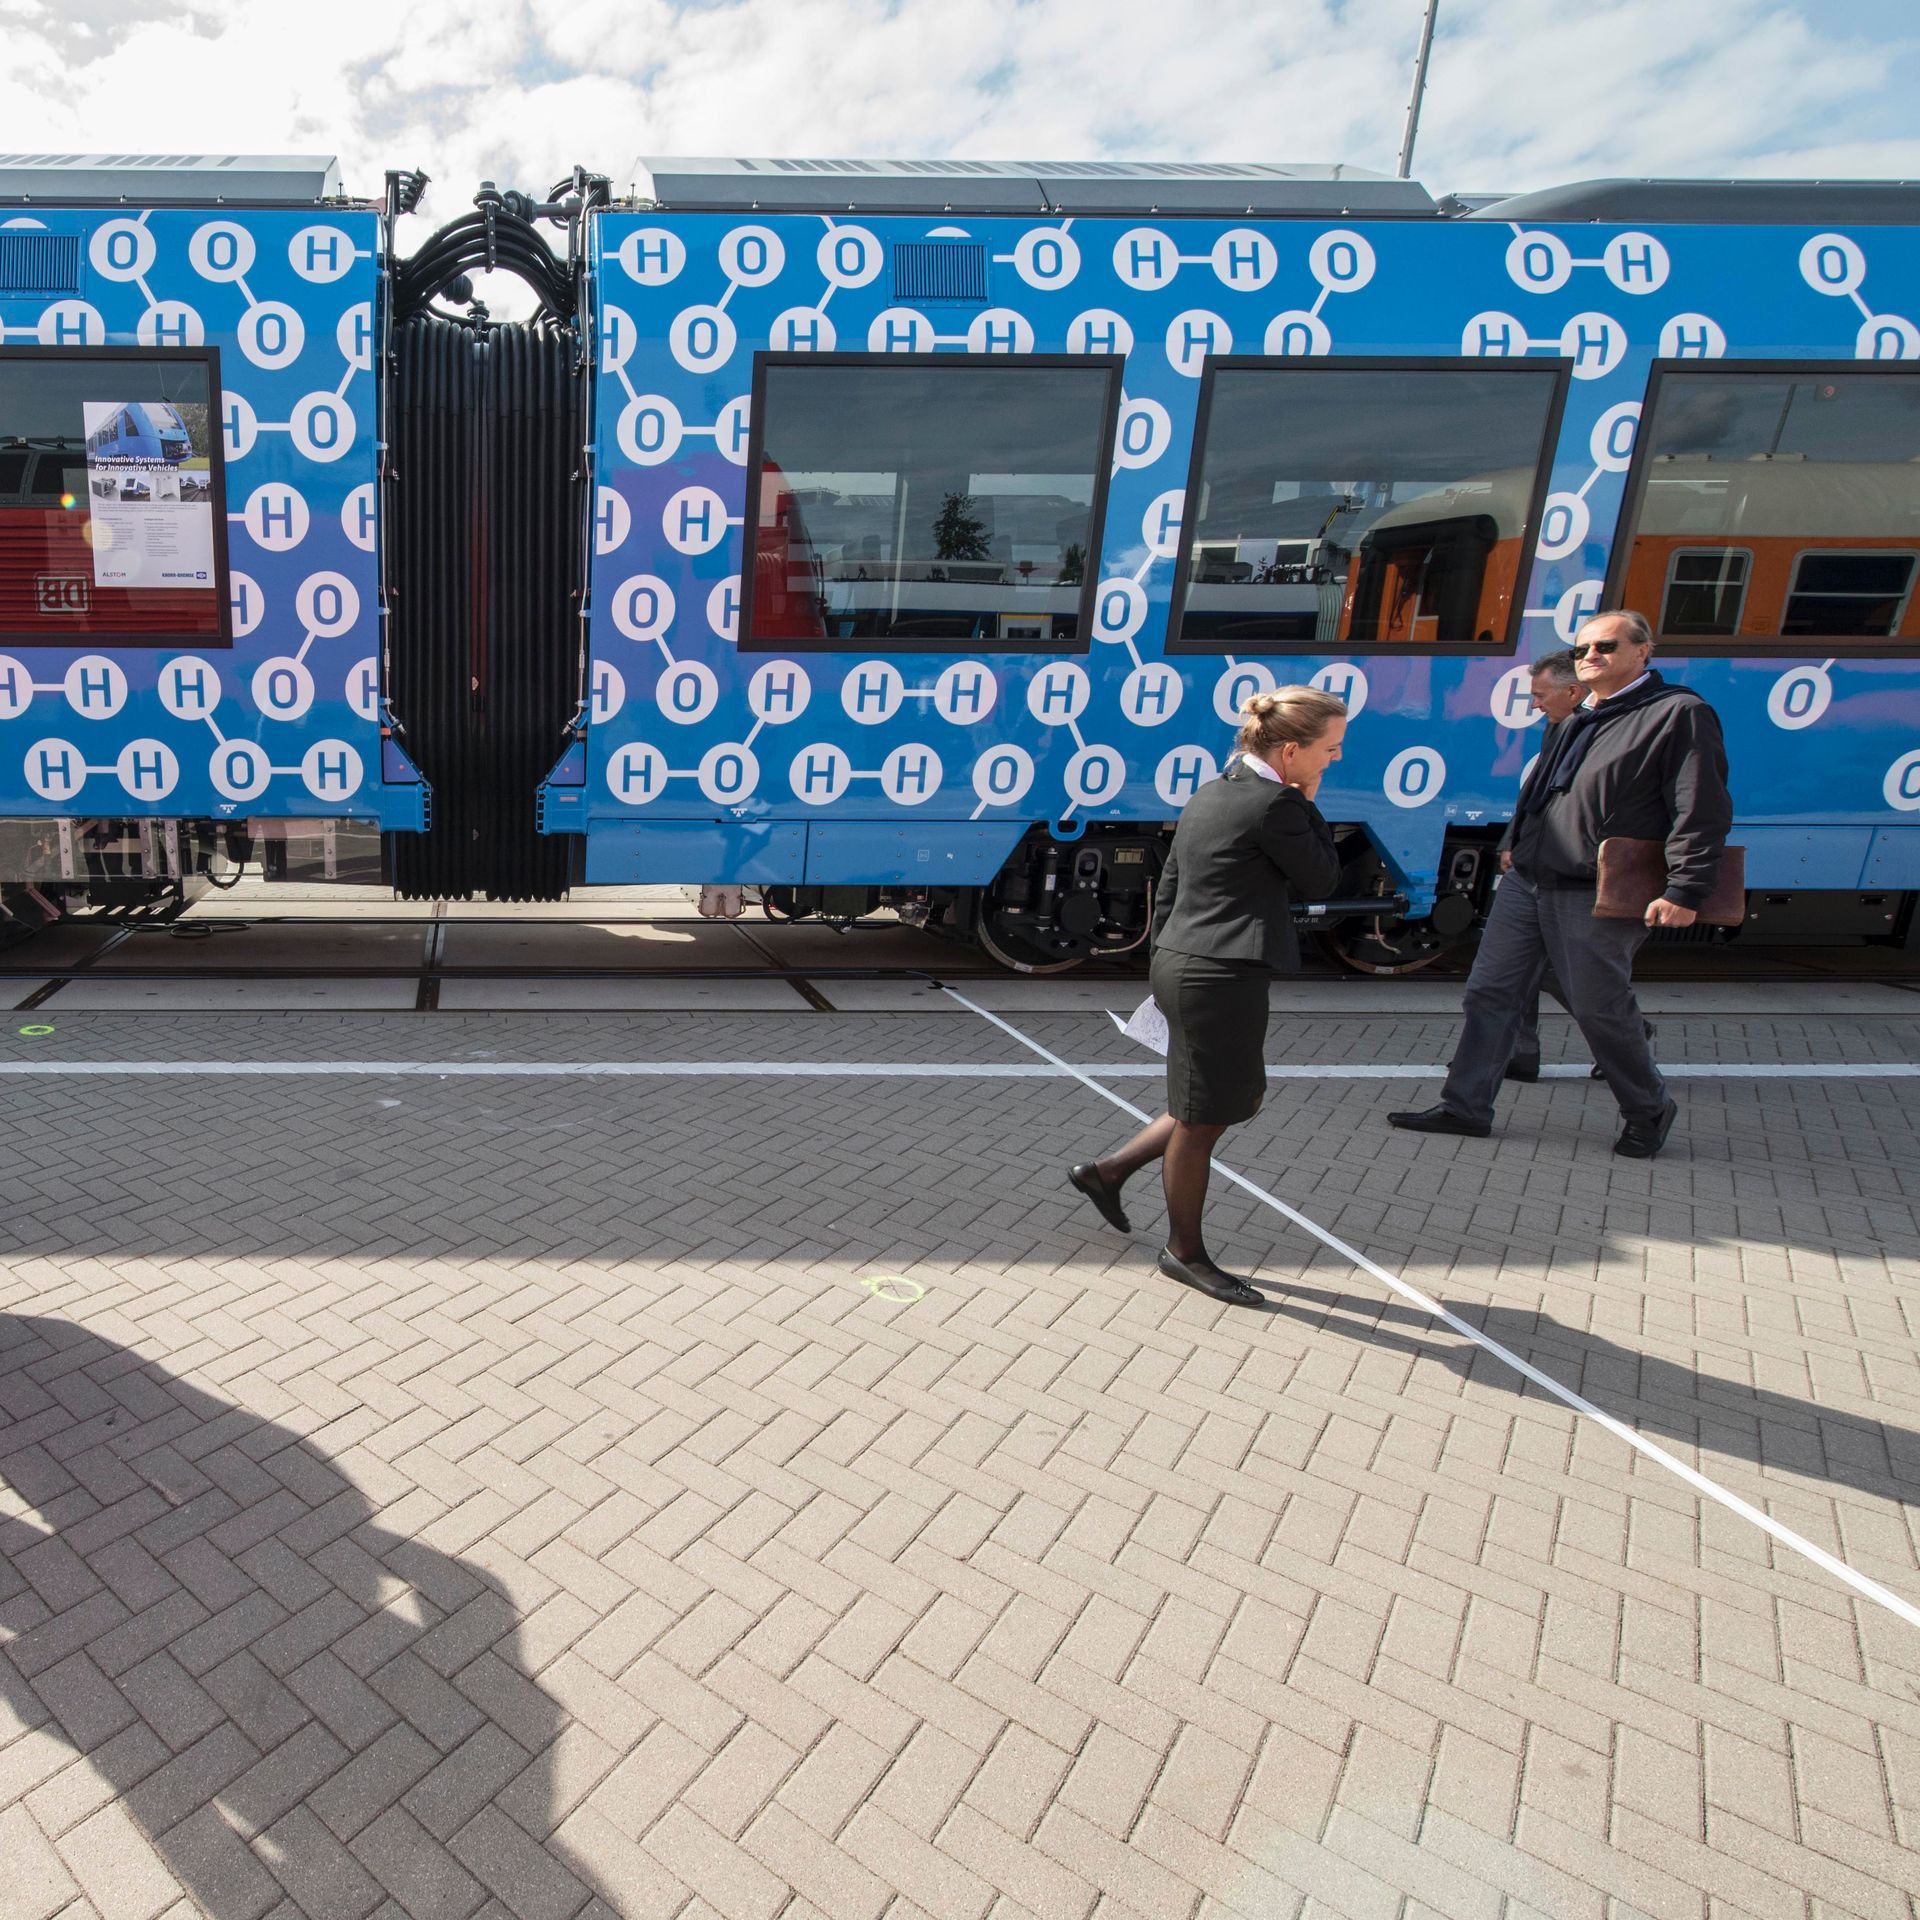 The Coradia iLint train, a CO2-emission-free regional train developed by French transport giant Alstom, is on display